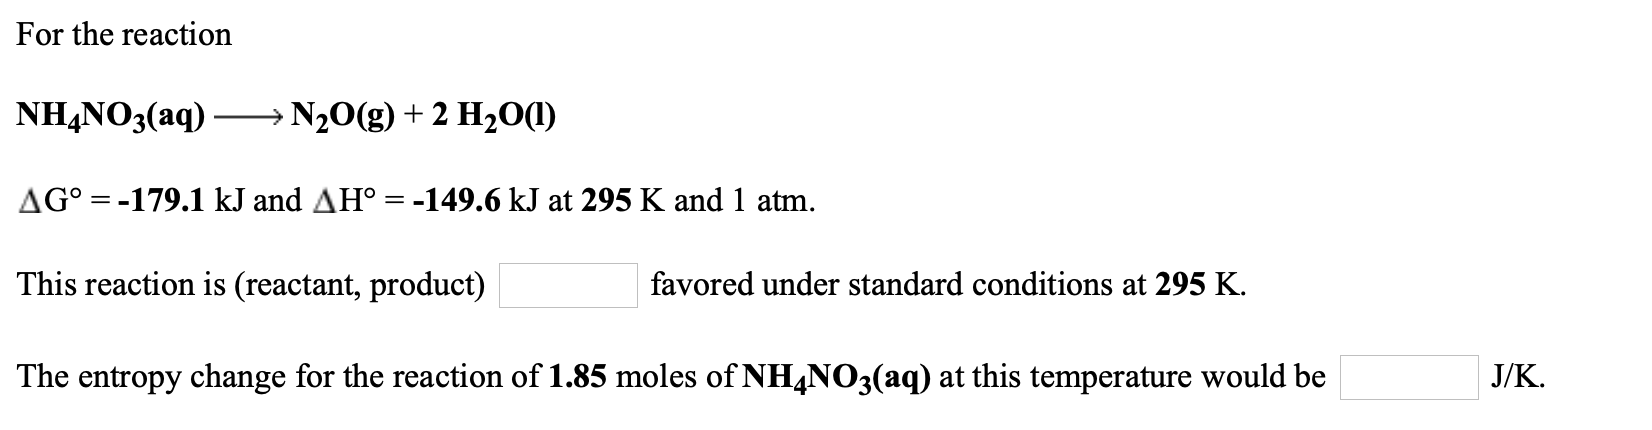 For the reaction
NH,NO3(aq) – N20(g) + 2 H2O(1)
AG° = -179.1 kJ and AH° = -149.6 kJ at 295 K and 1 atm.
This reaction is (reactant, product)
favored under standard conditions at 295 K.
The entropy change for the reaction of 1.85 moles of NH4NO3(aq) at this temperature would be
J/K.
